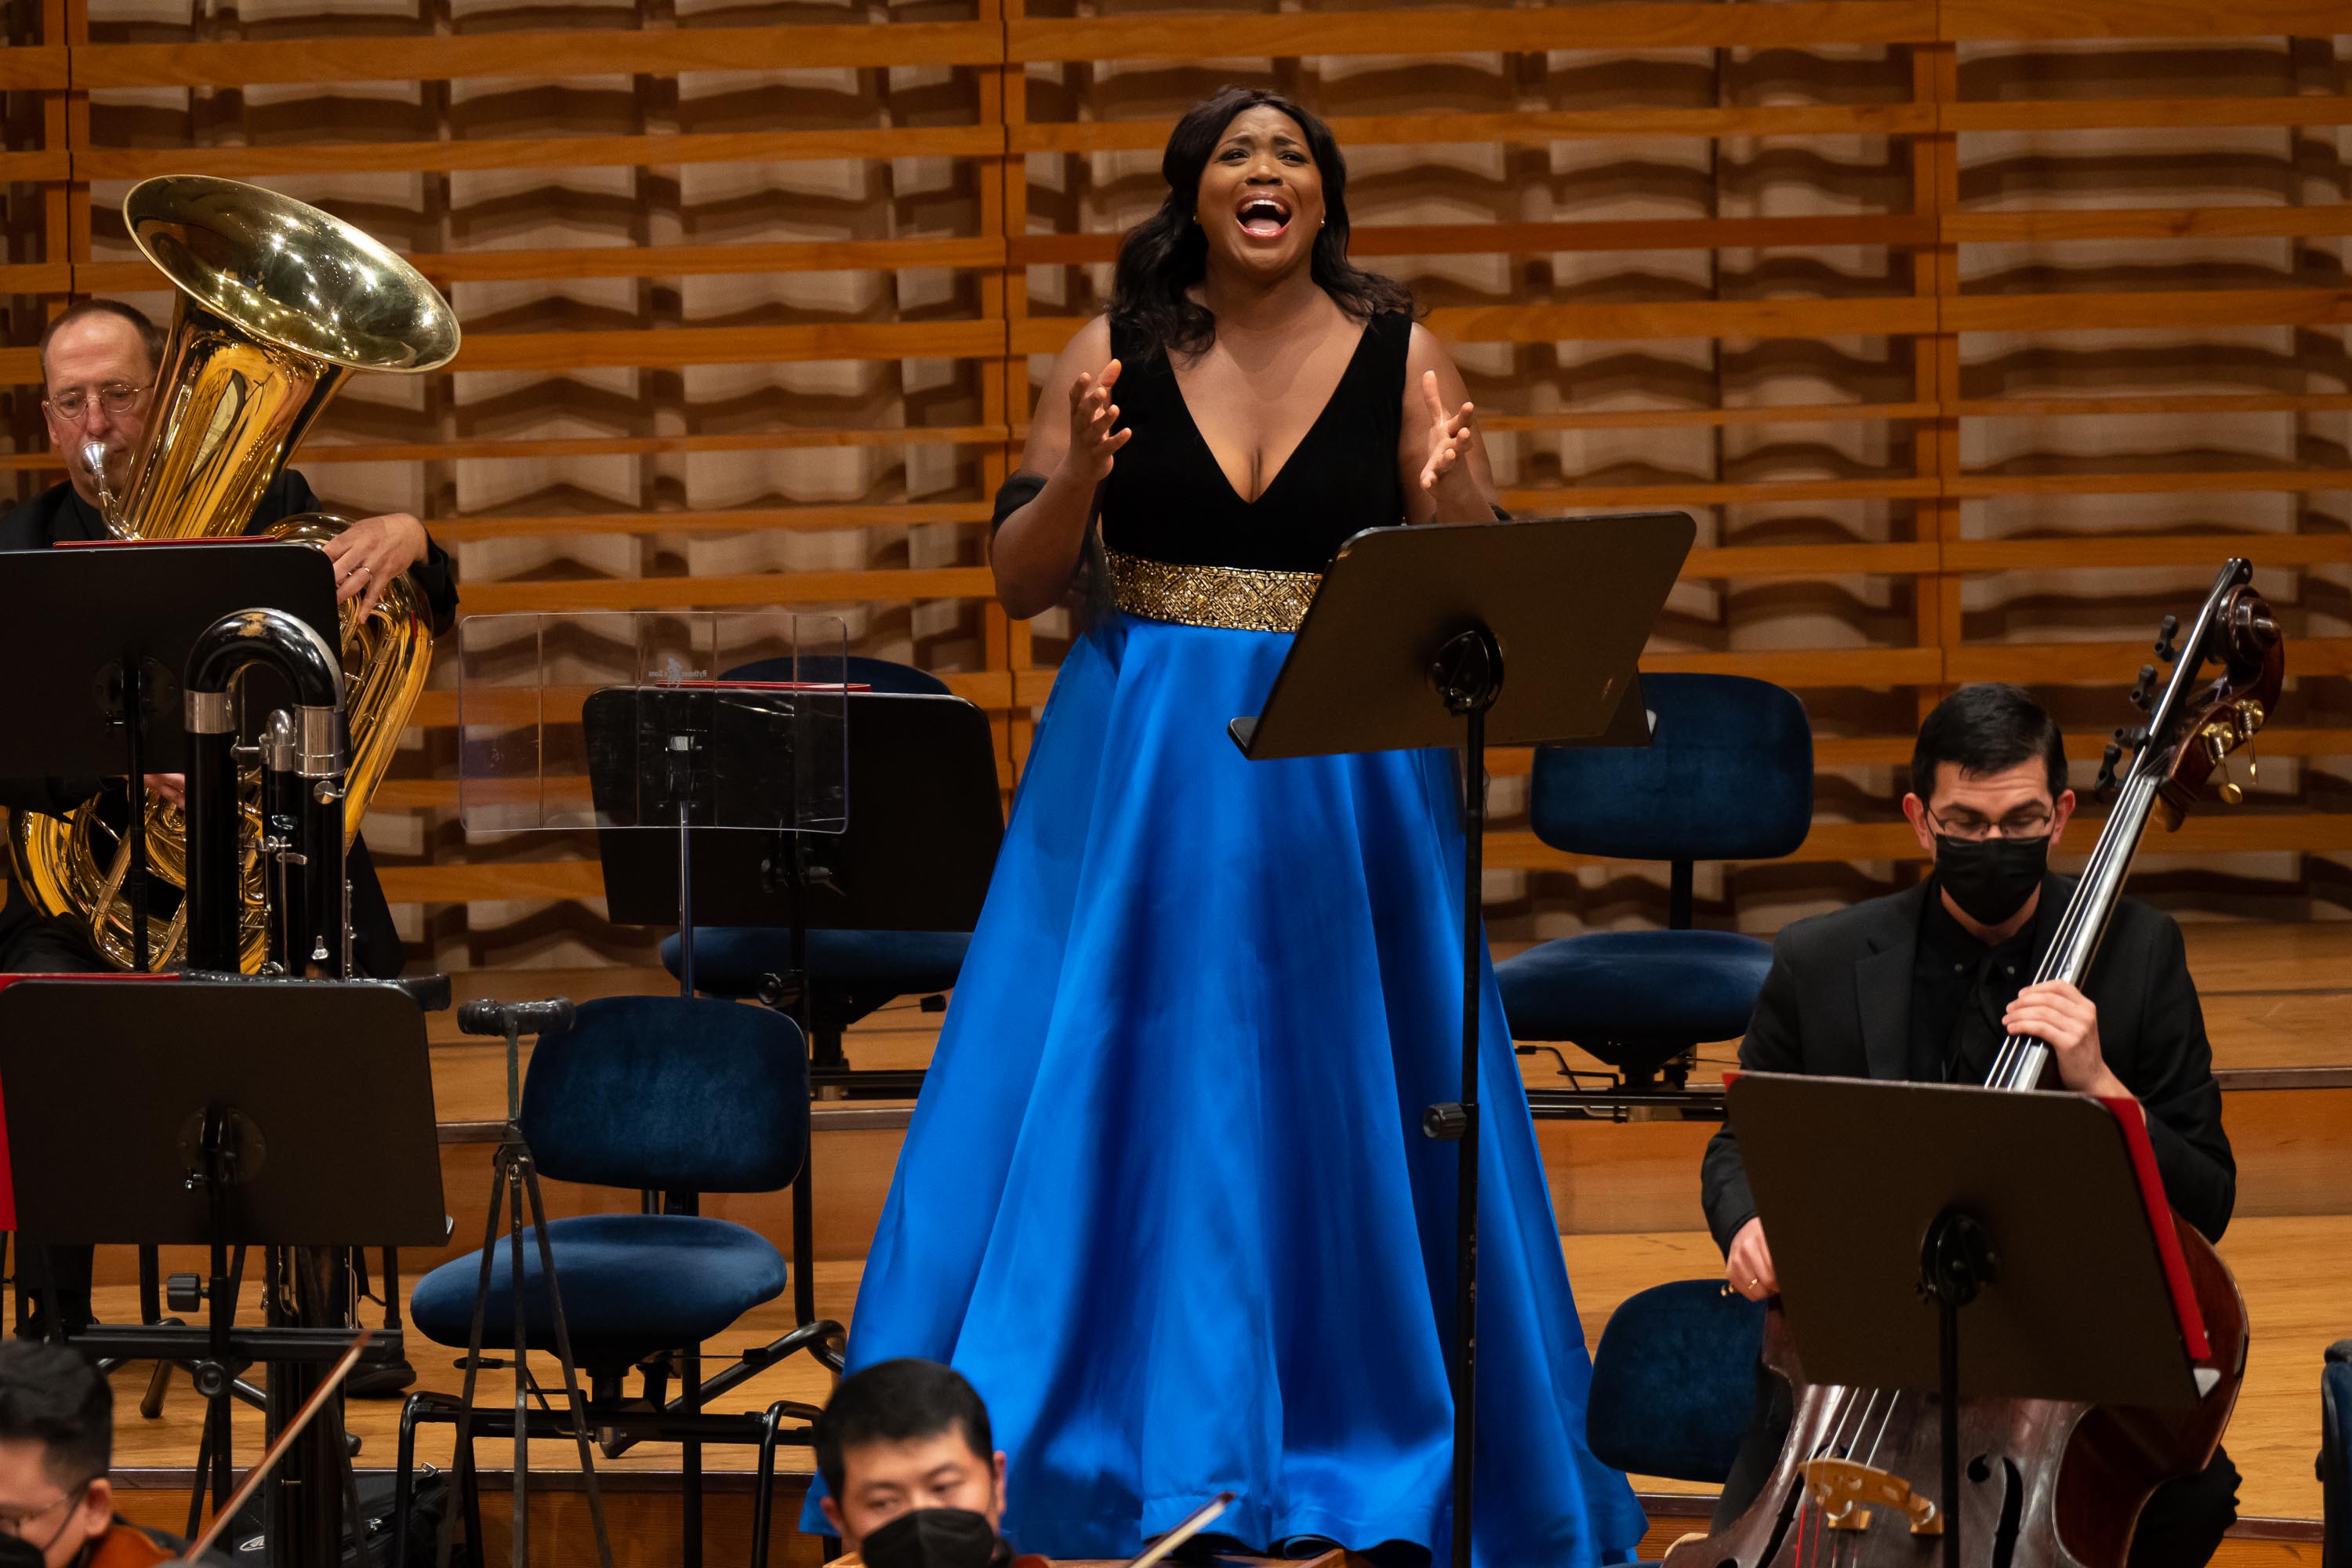 The Orchestra’s first concert included the Swiss premiere of Valerie Coleman’s This Is Not a Small Voice, sung by soprano Angel Blue